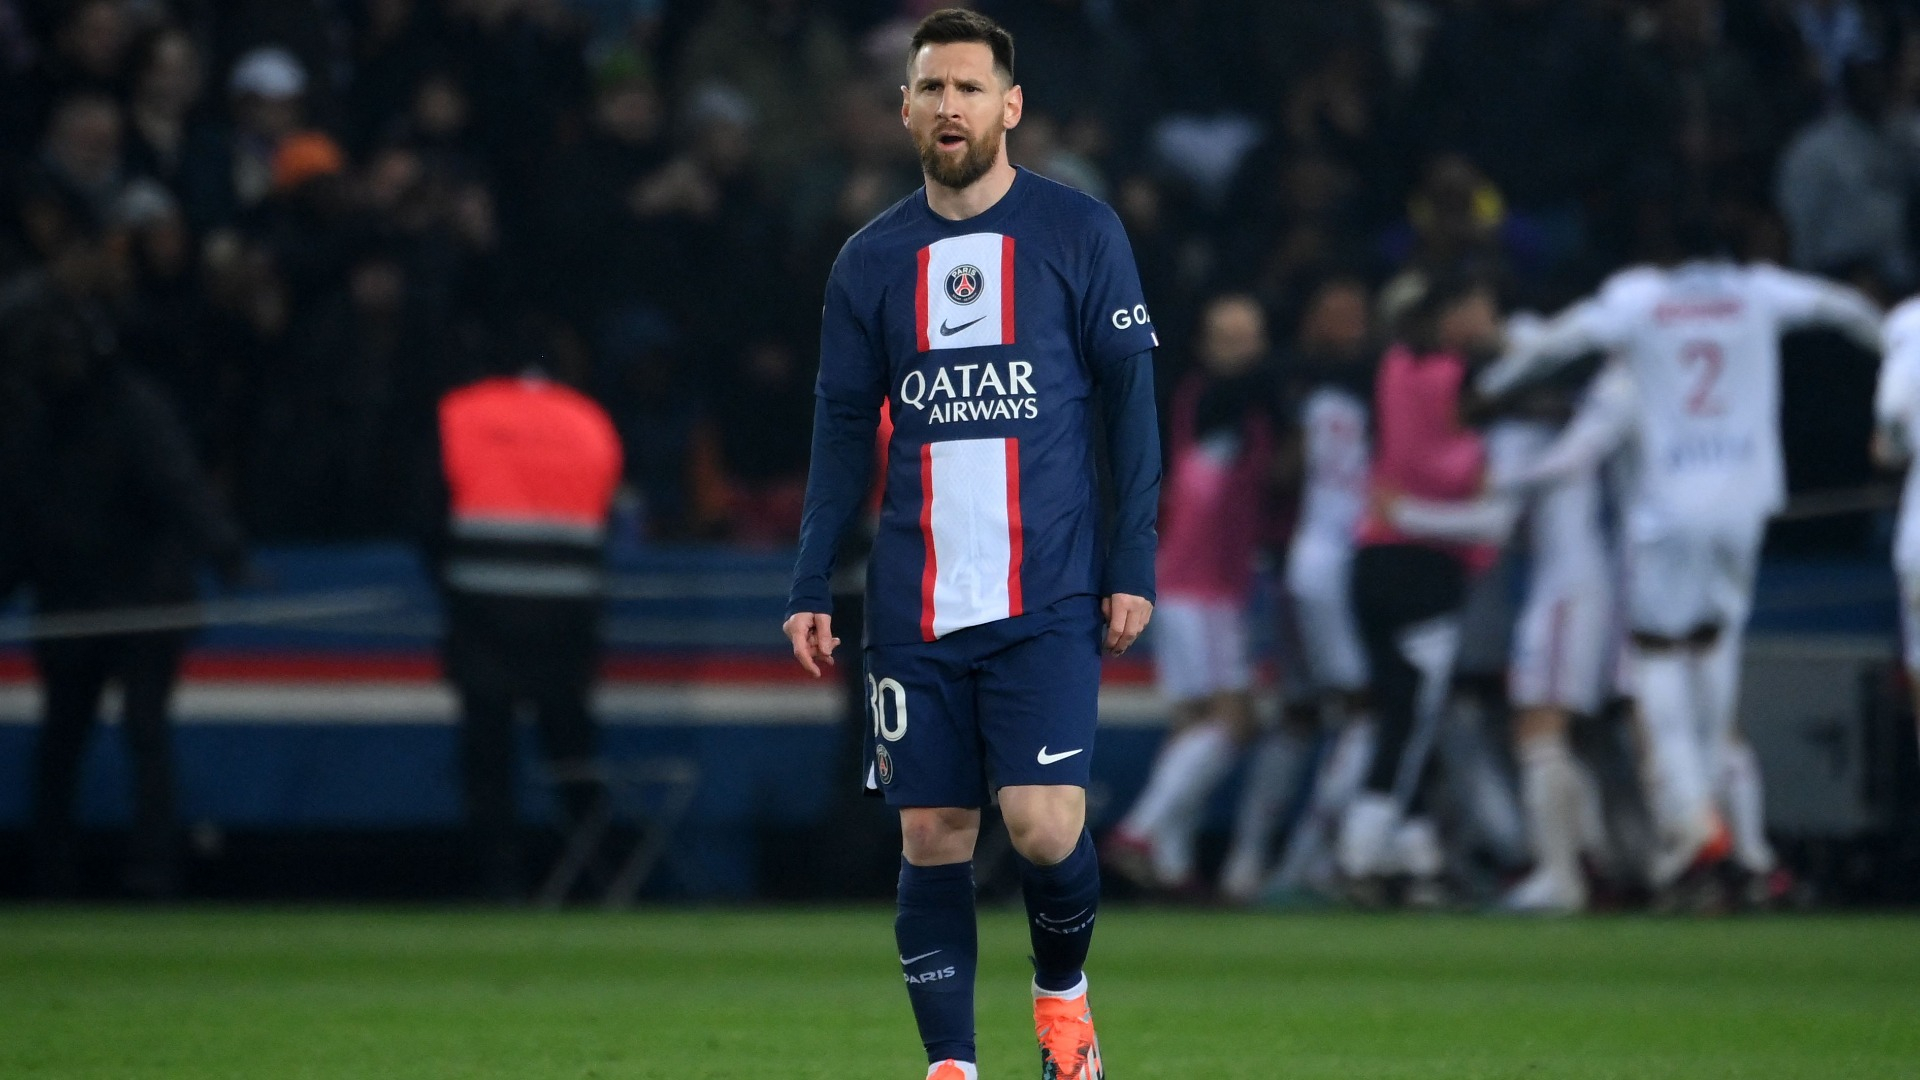 RC Lens defender reveals his thank you message to Messi after swapping  shirts with the PSG star - PSG Talk